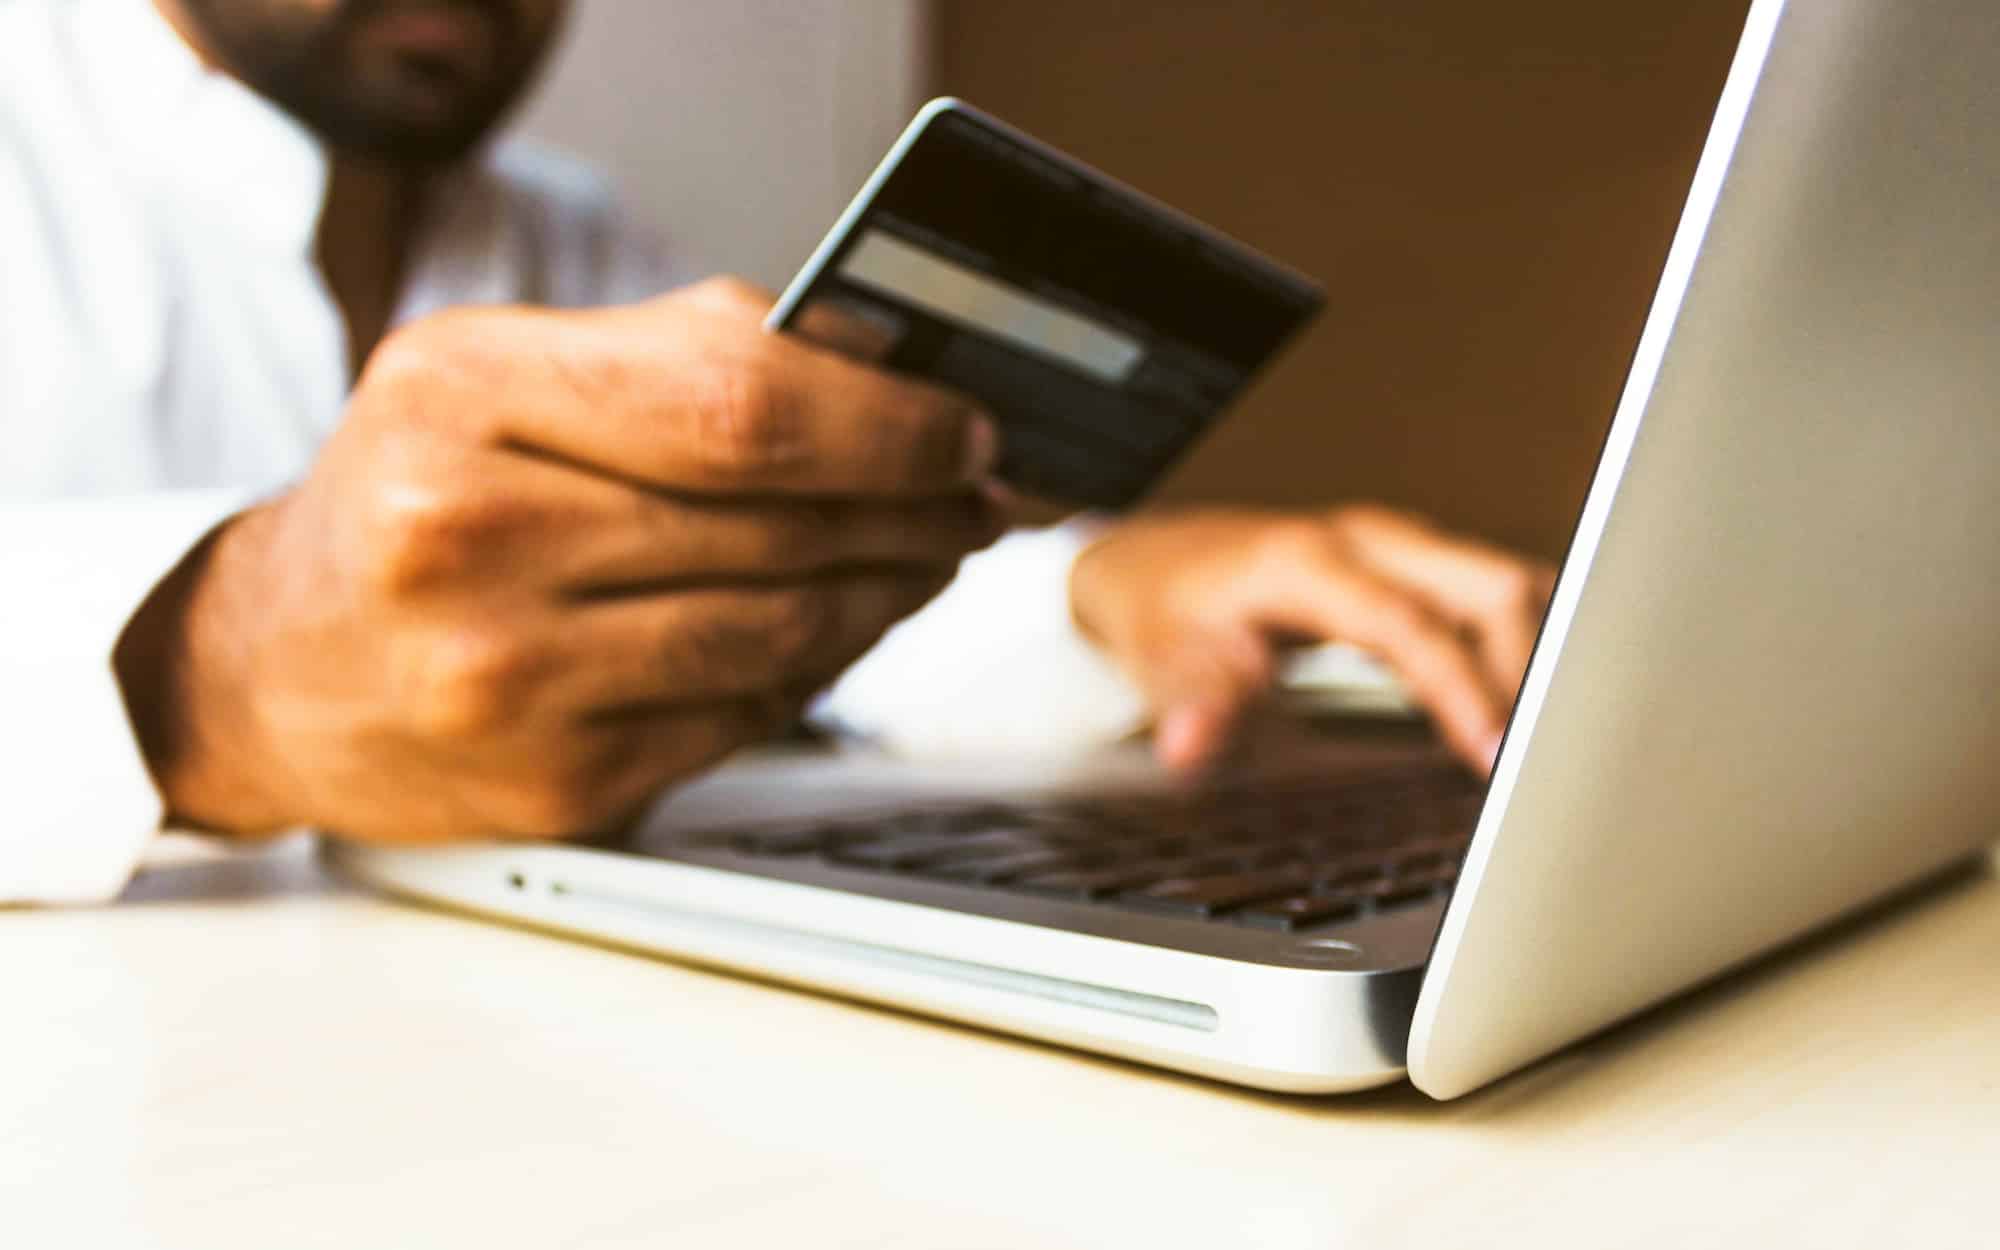 How to quickly process transactions related to payment fraud